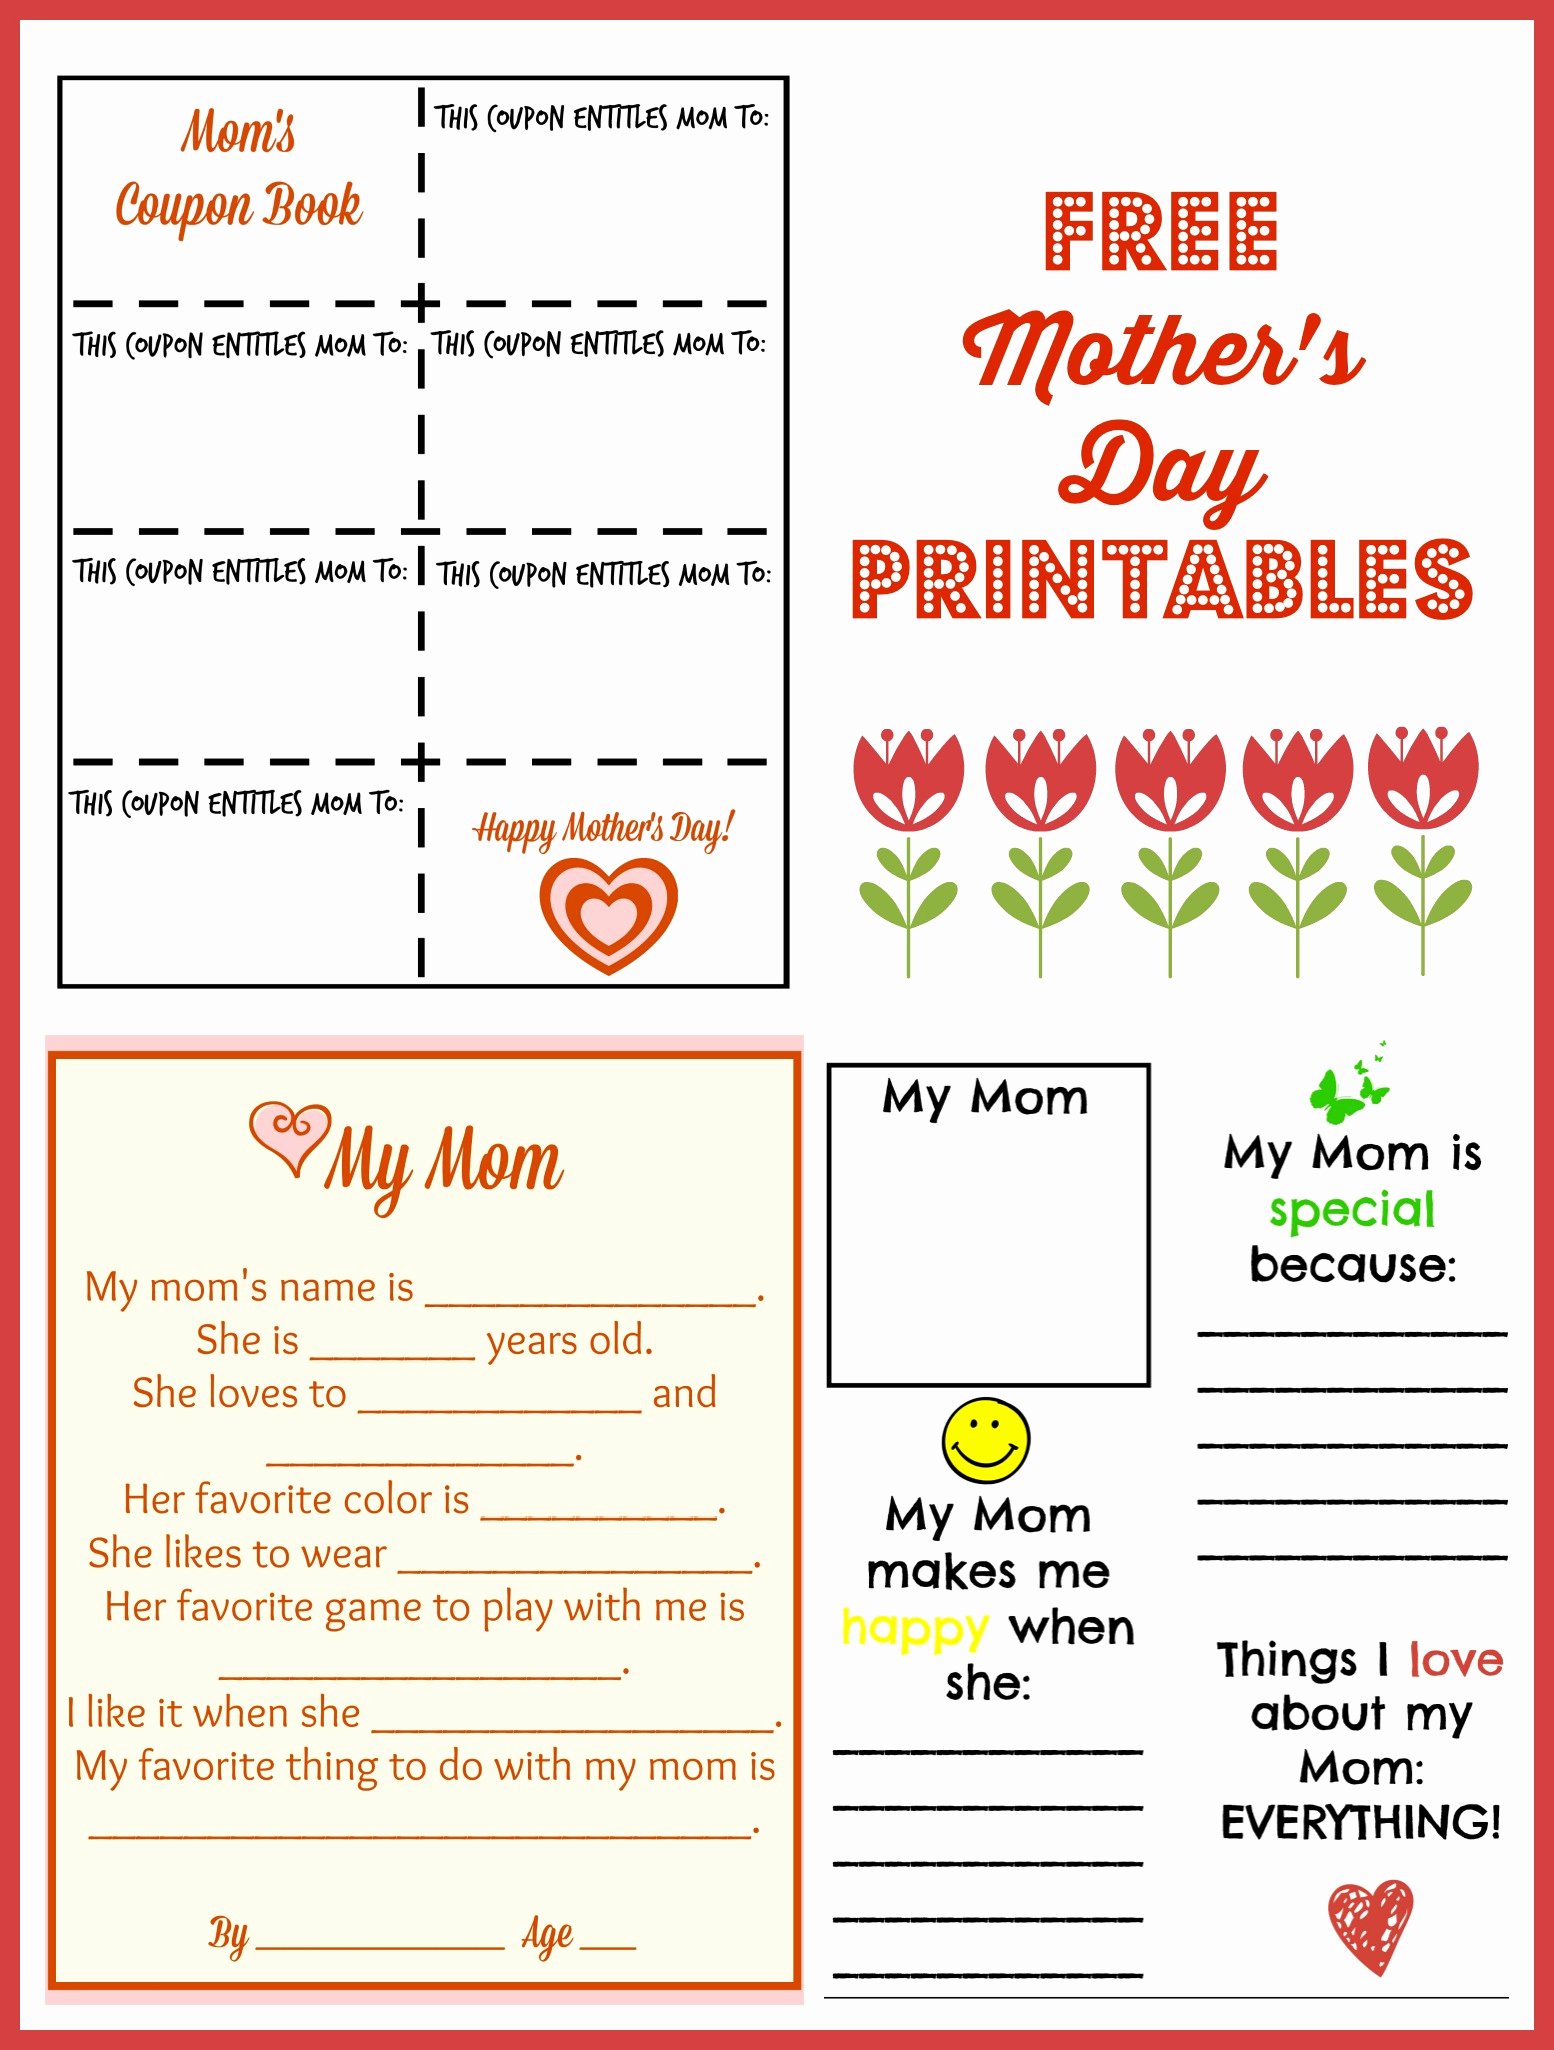 Free Mother S Day Printables Make It for Mom